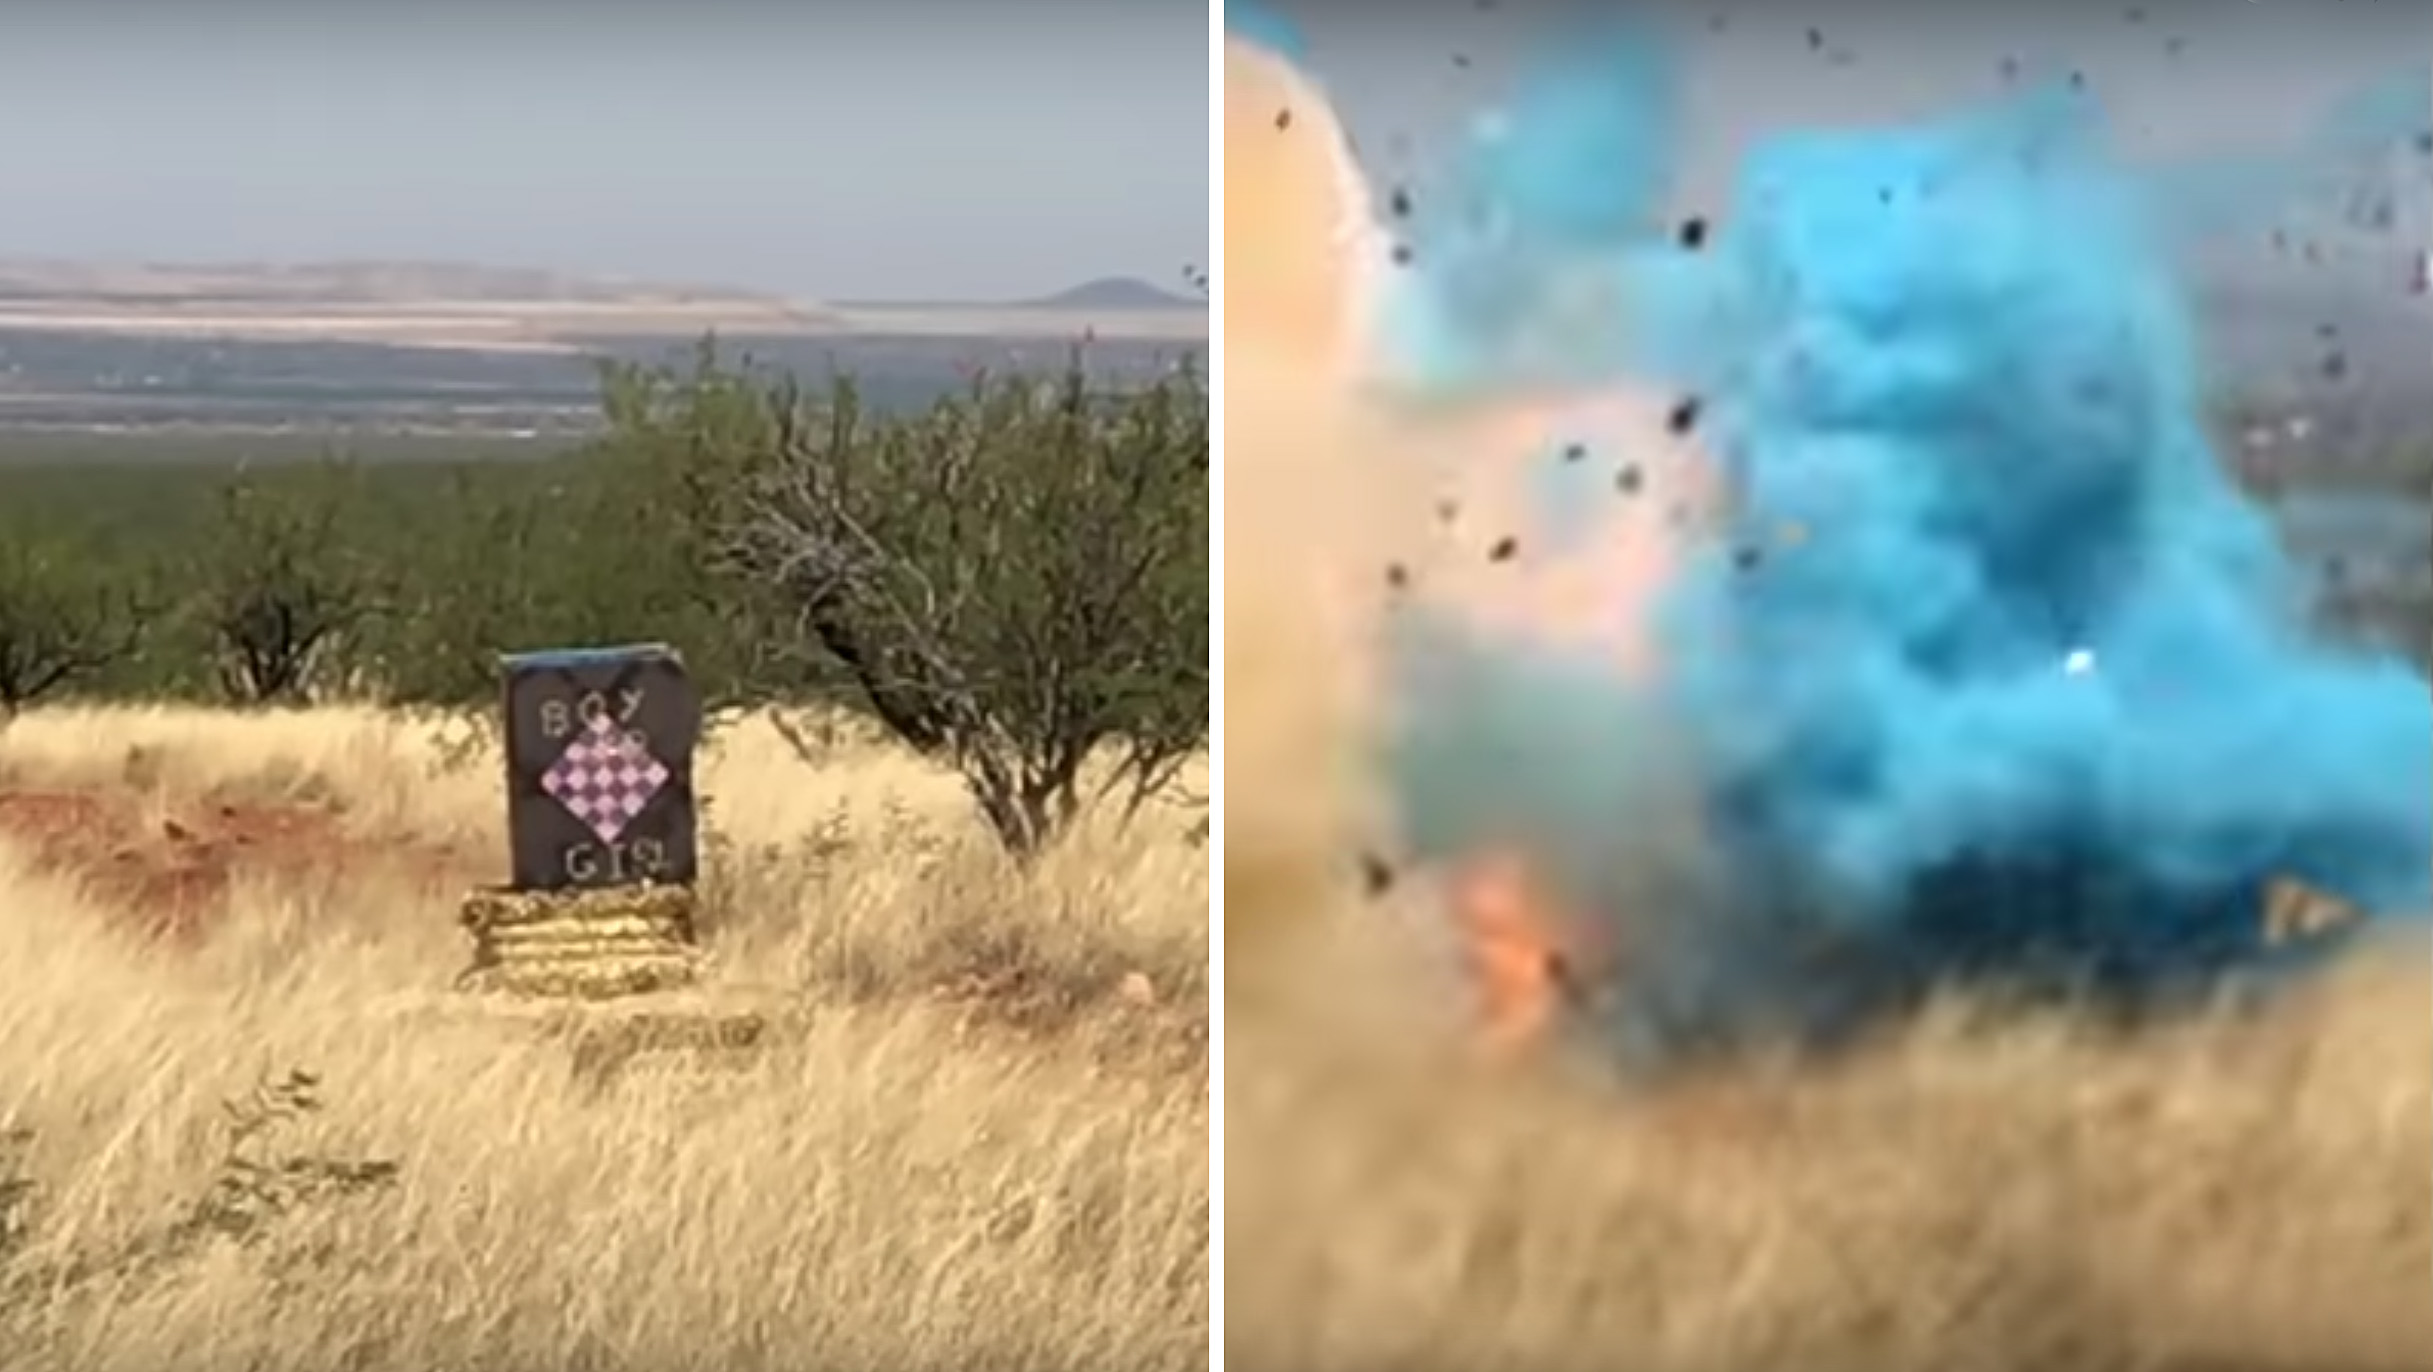 Video Shows Gender Reveal Explosion That Sparked Sawmill Wildfire The Daily Courier Prescott Az